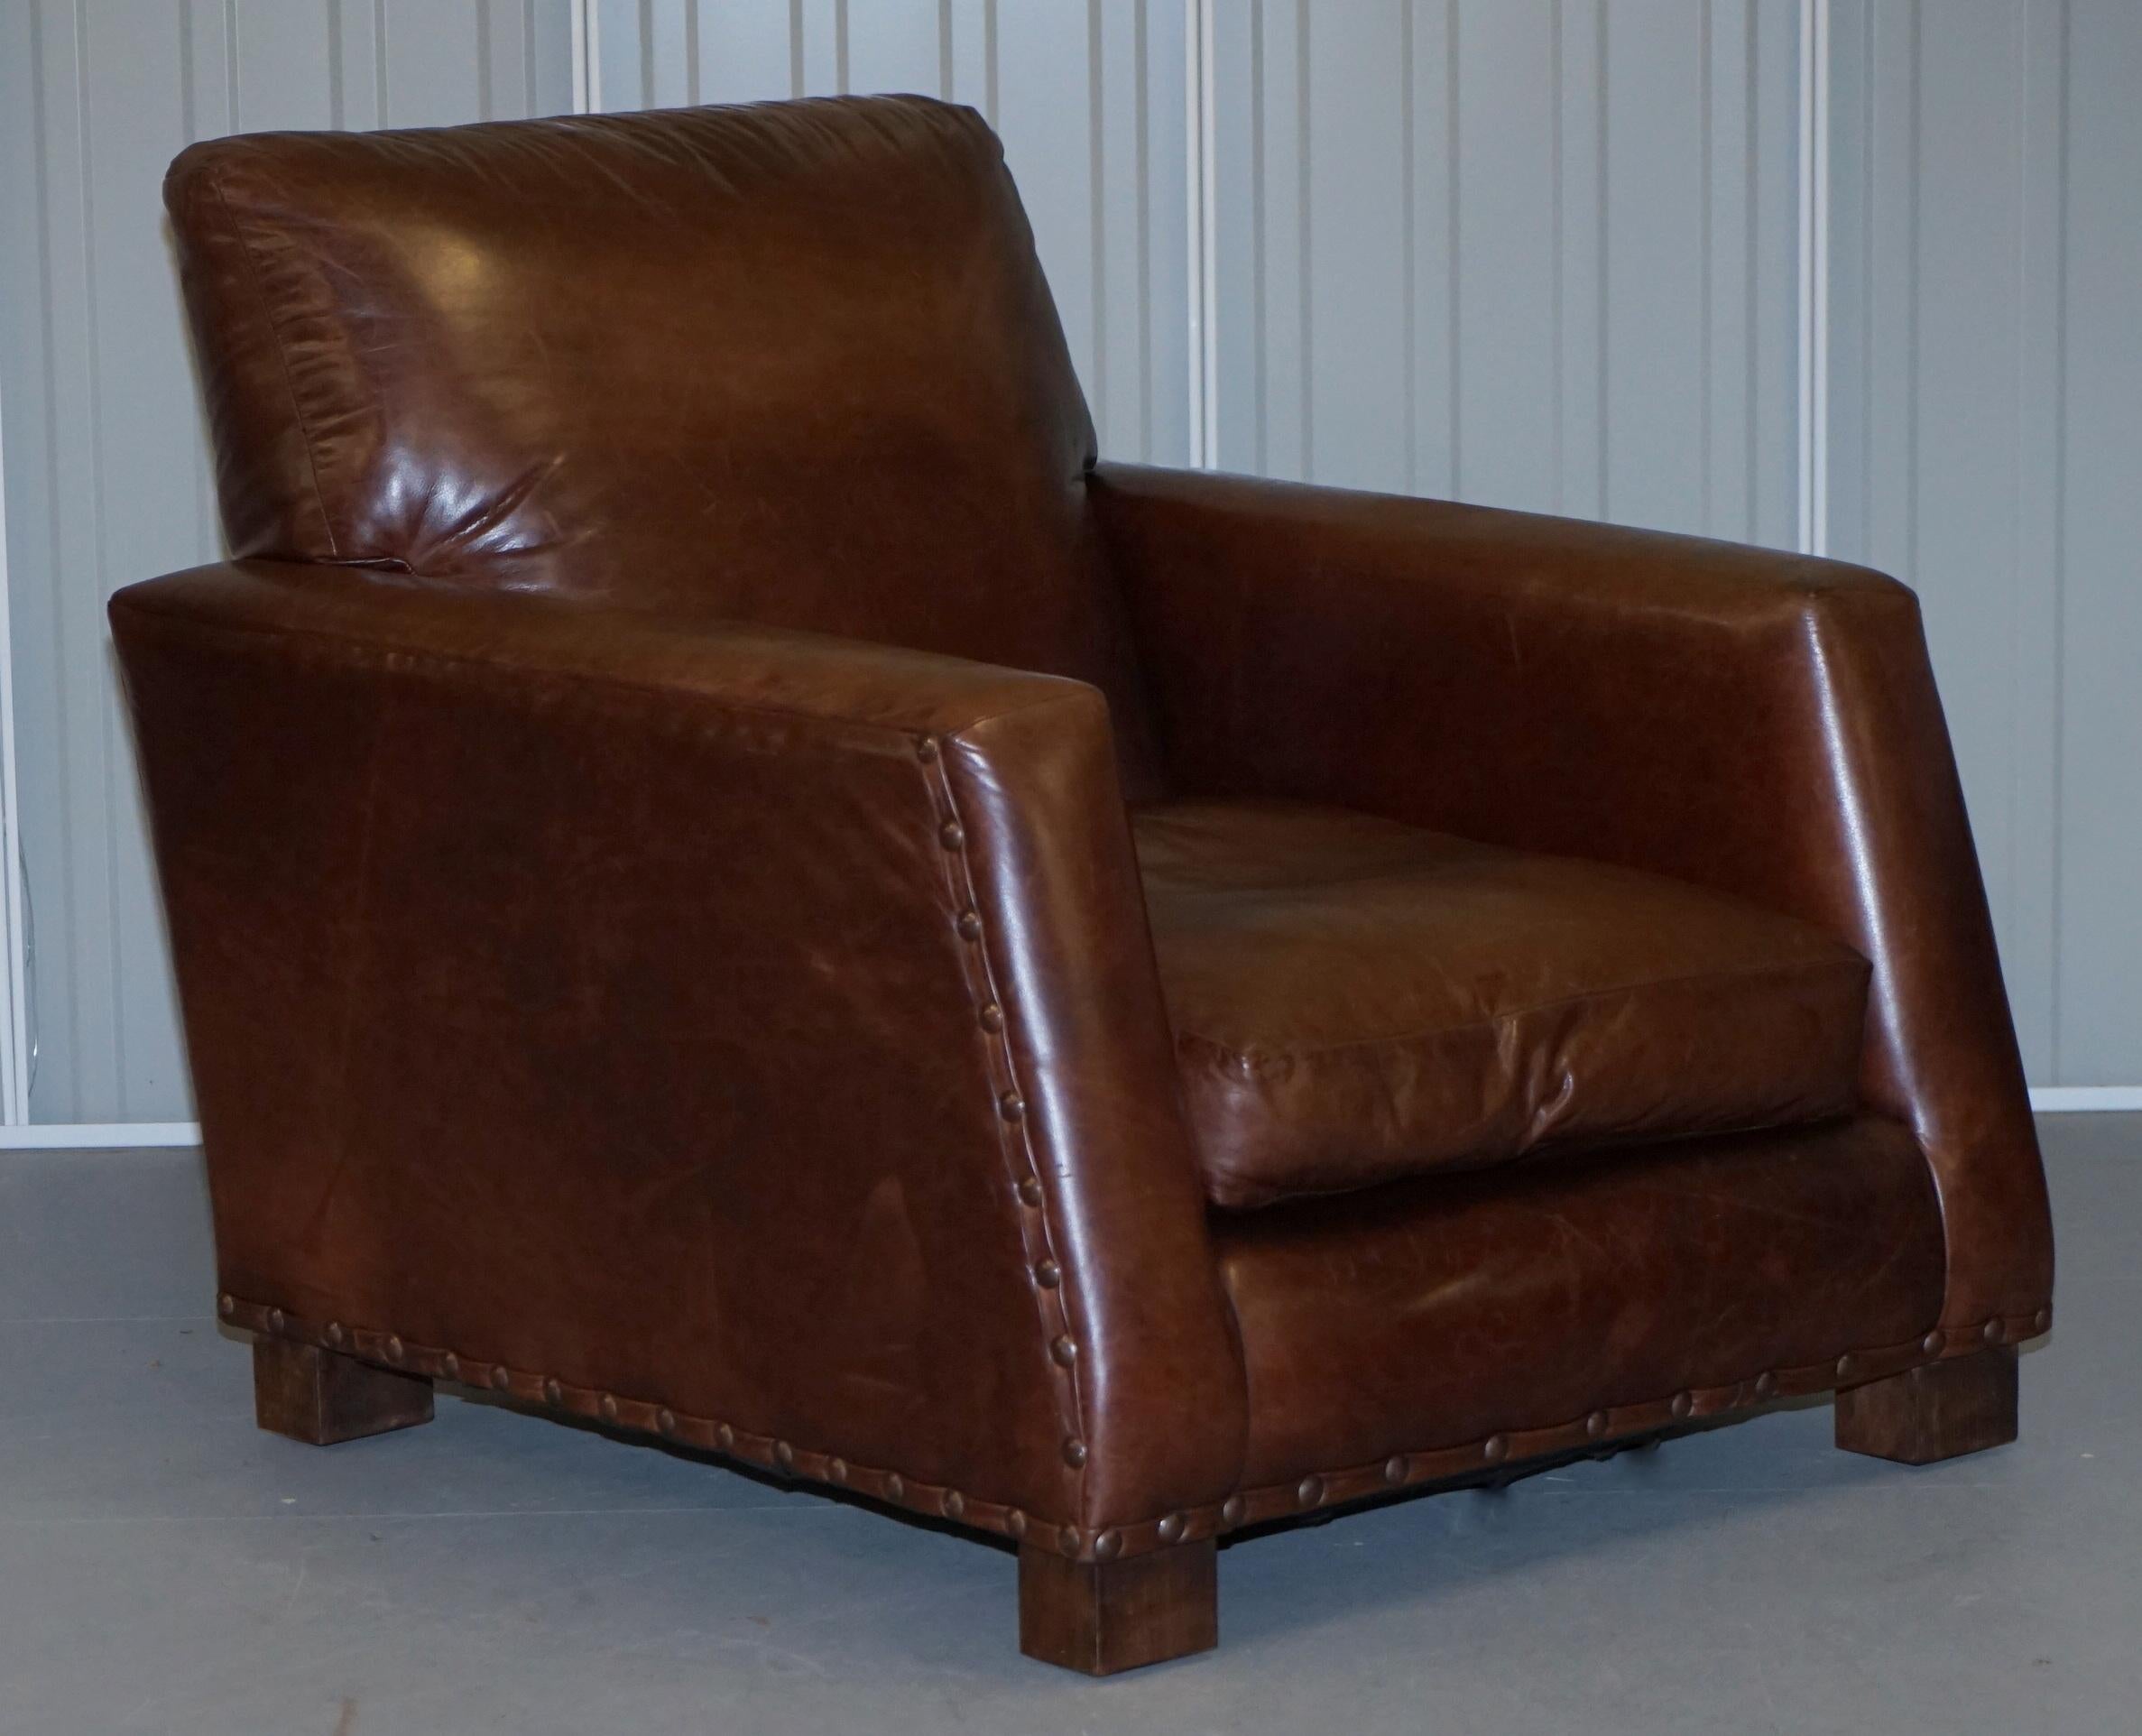 We are delighted to offer for sale this stunning vintage Ralph Lauren brown leather club armchair and matching ottoman 

A seriously comfortable pair in heritage buffalo brown leather with oversized antiqued studs

The pair have been lightly